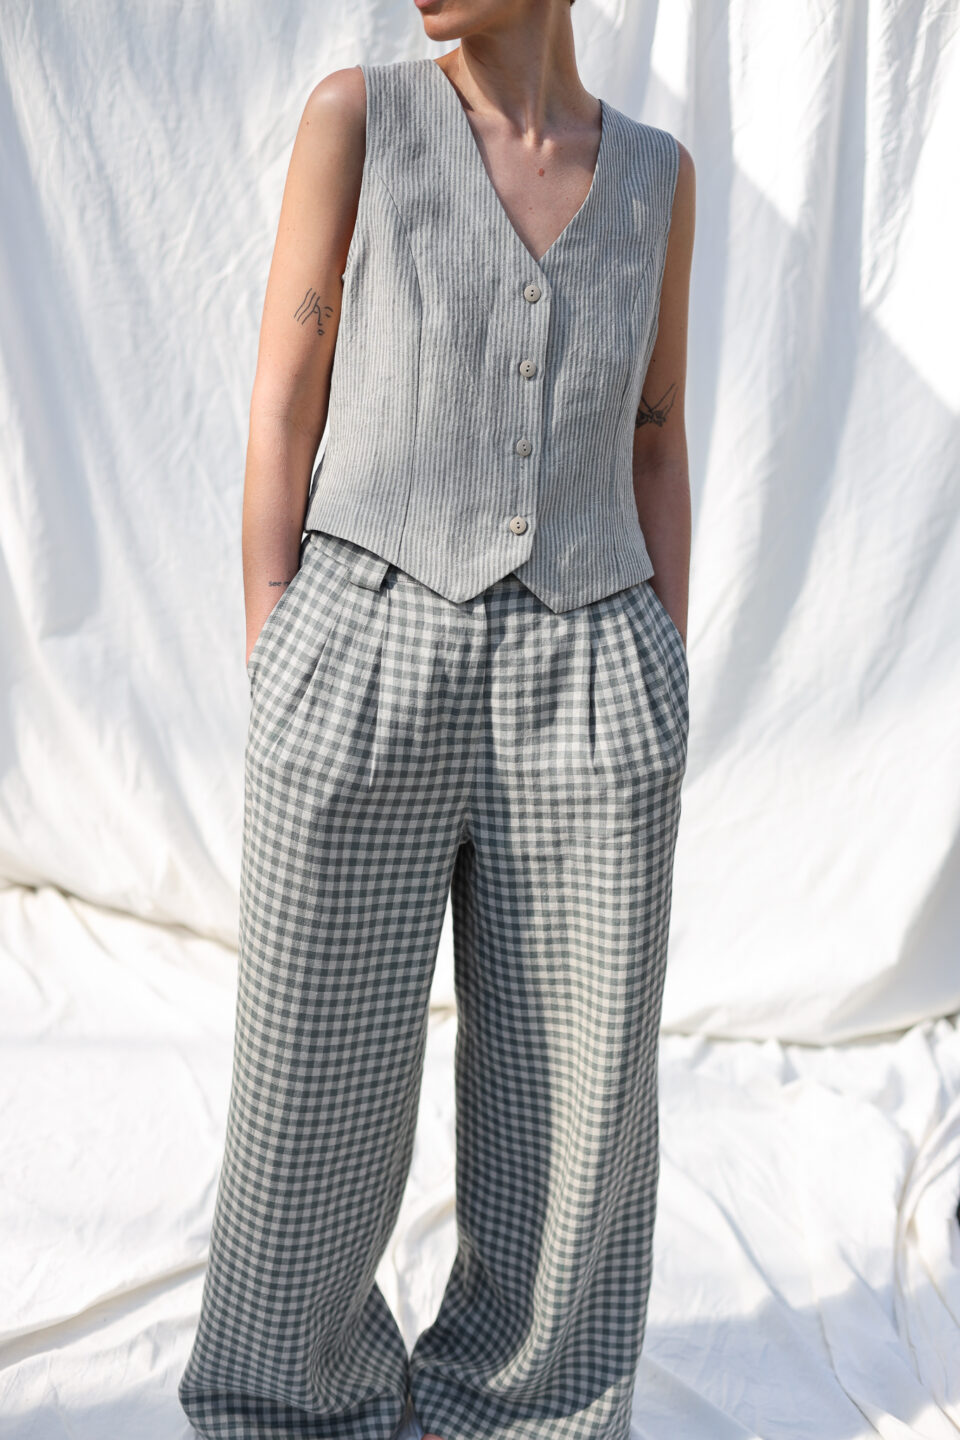 Classic striped linen waistcoat | Vest | Sustainable clothing | OffOn clothing